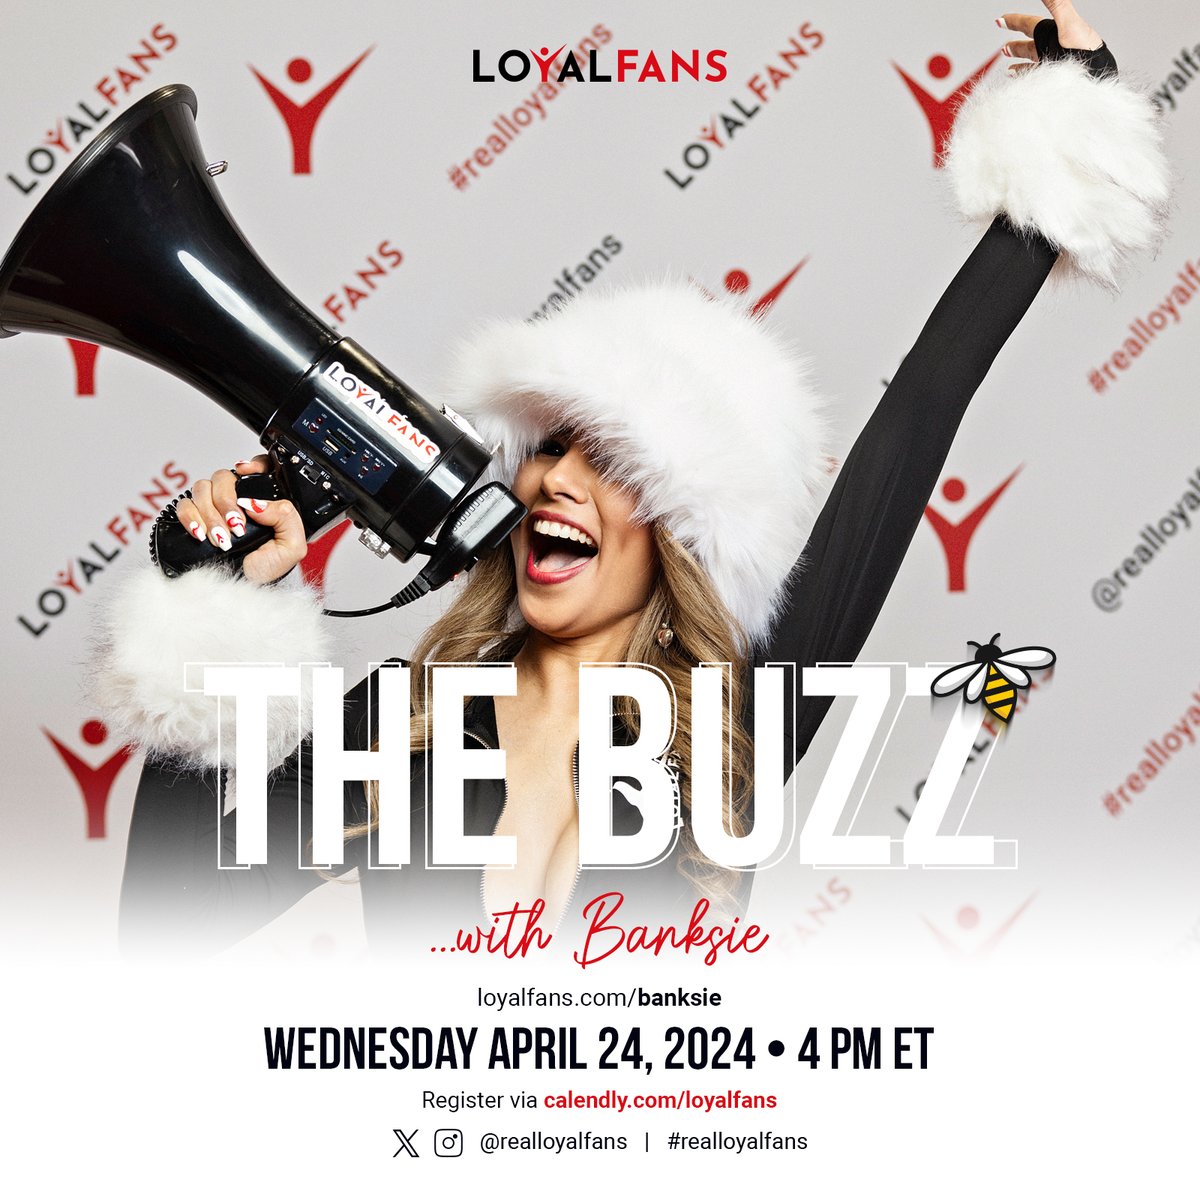 📣 BRAND NEW ON #REALLOYALFANS 📣 Come check out The Buzz with Banksie 🤩 on the 4th Wed of every month at 4pm ET - including THIS WED April 24! Event wrap-ups, interviews & so much more! Bee there 🐝 Register in advance ➡️ calendly.com/loyalfans